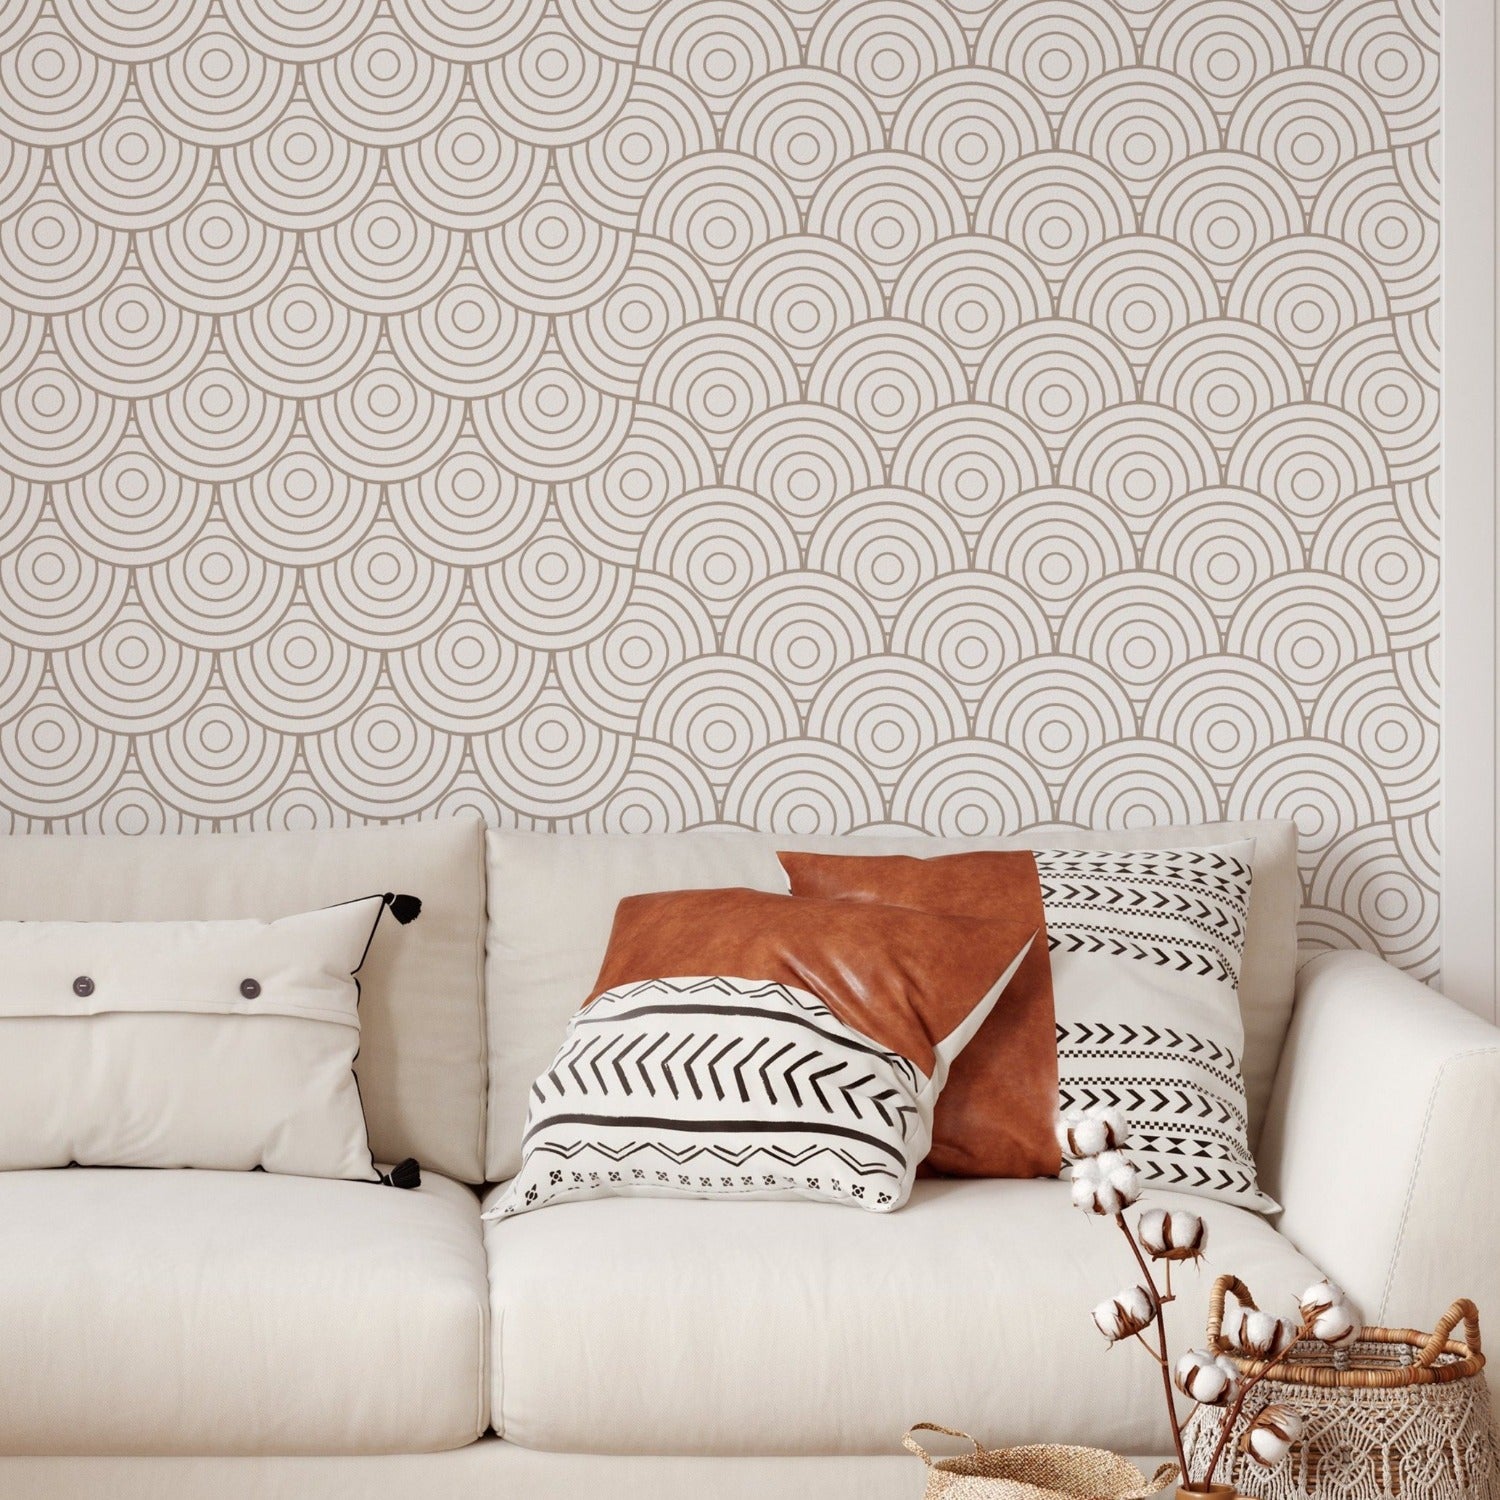 In a cozy room corner, the Geometric Japanese Wallpaper acts as a subtle yet impactful backdrop to a modern cream sofa adorned with stylish pillows. The wallpaper's pattern promotes a sense of calm and order, perfectly complementing the simple elegance of the decor.